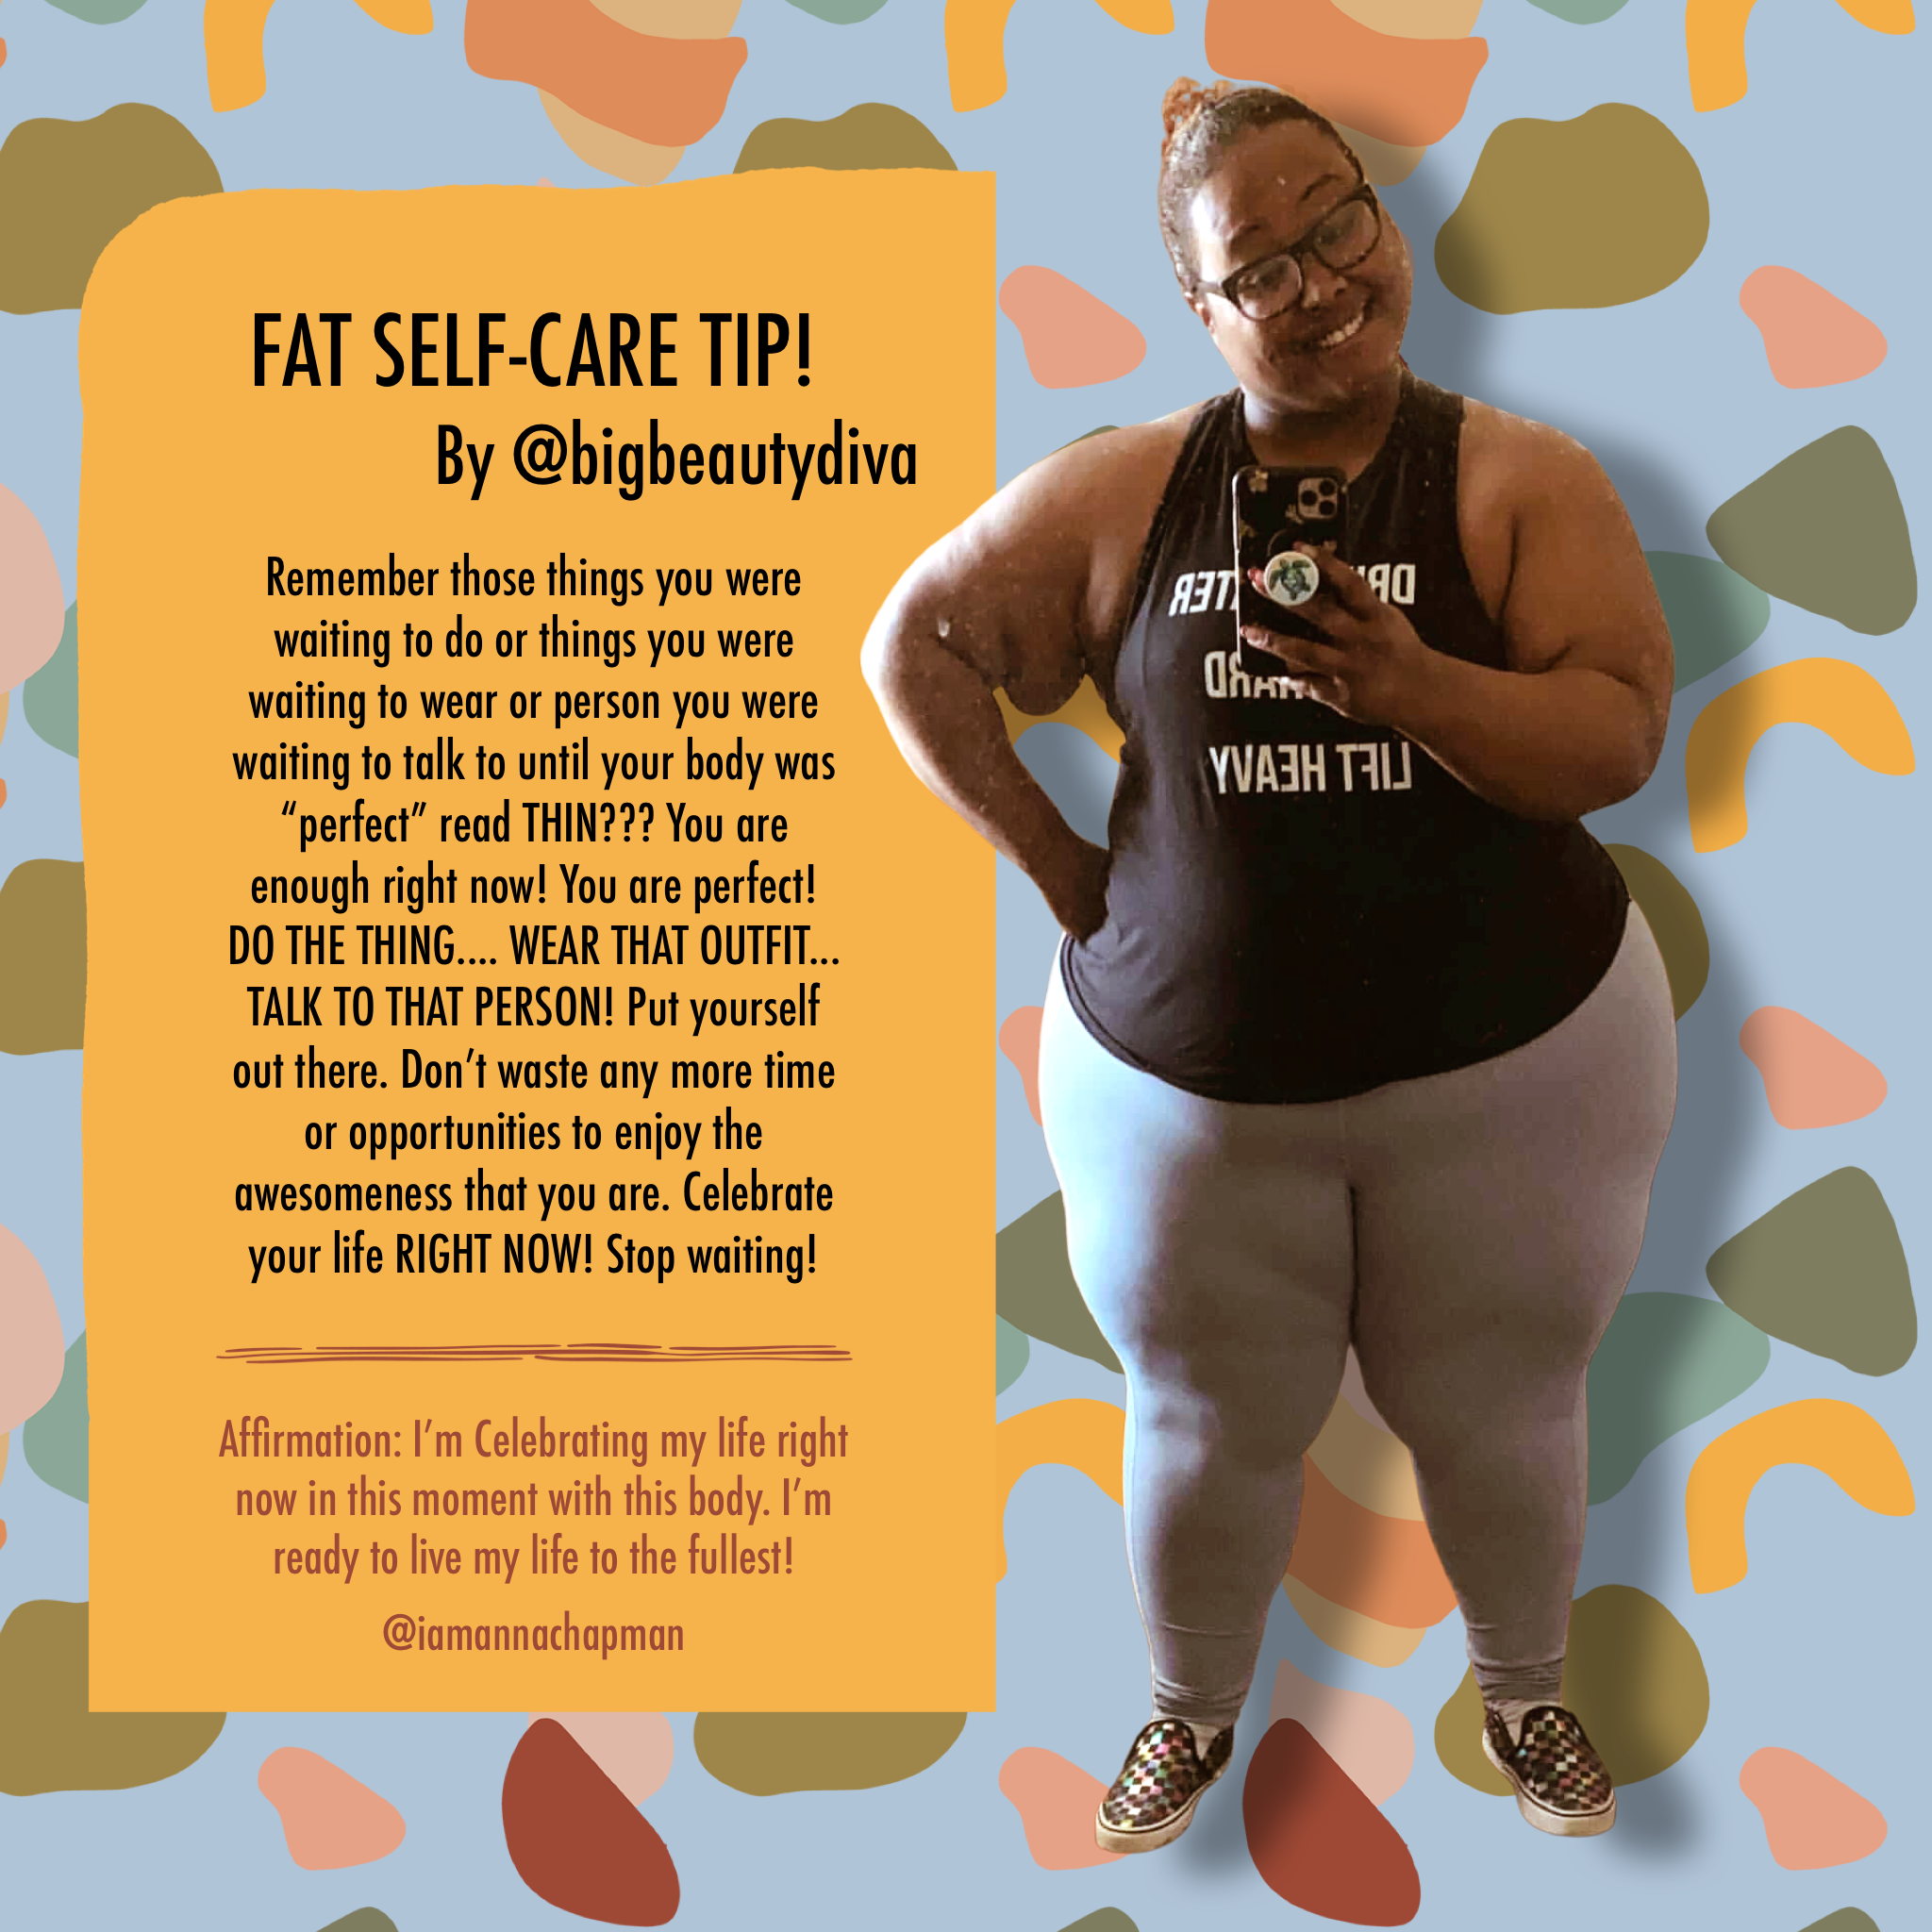 SELF CARE FOR FAT BODIES - COMMUNITY RECOMMENDATIONS AND RESOURCES